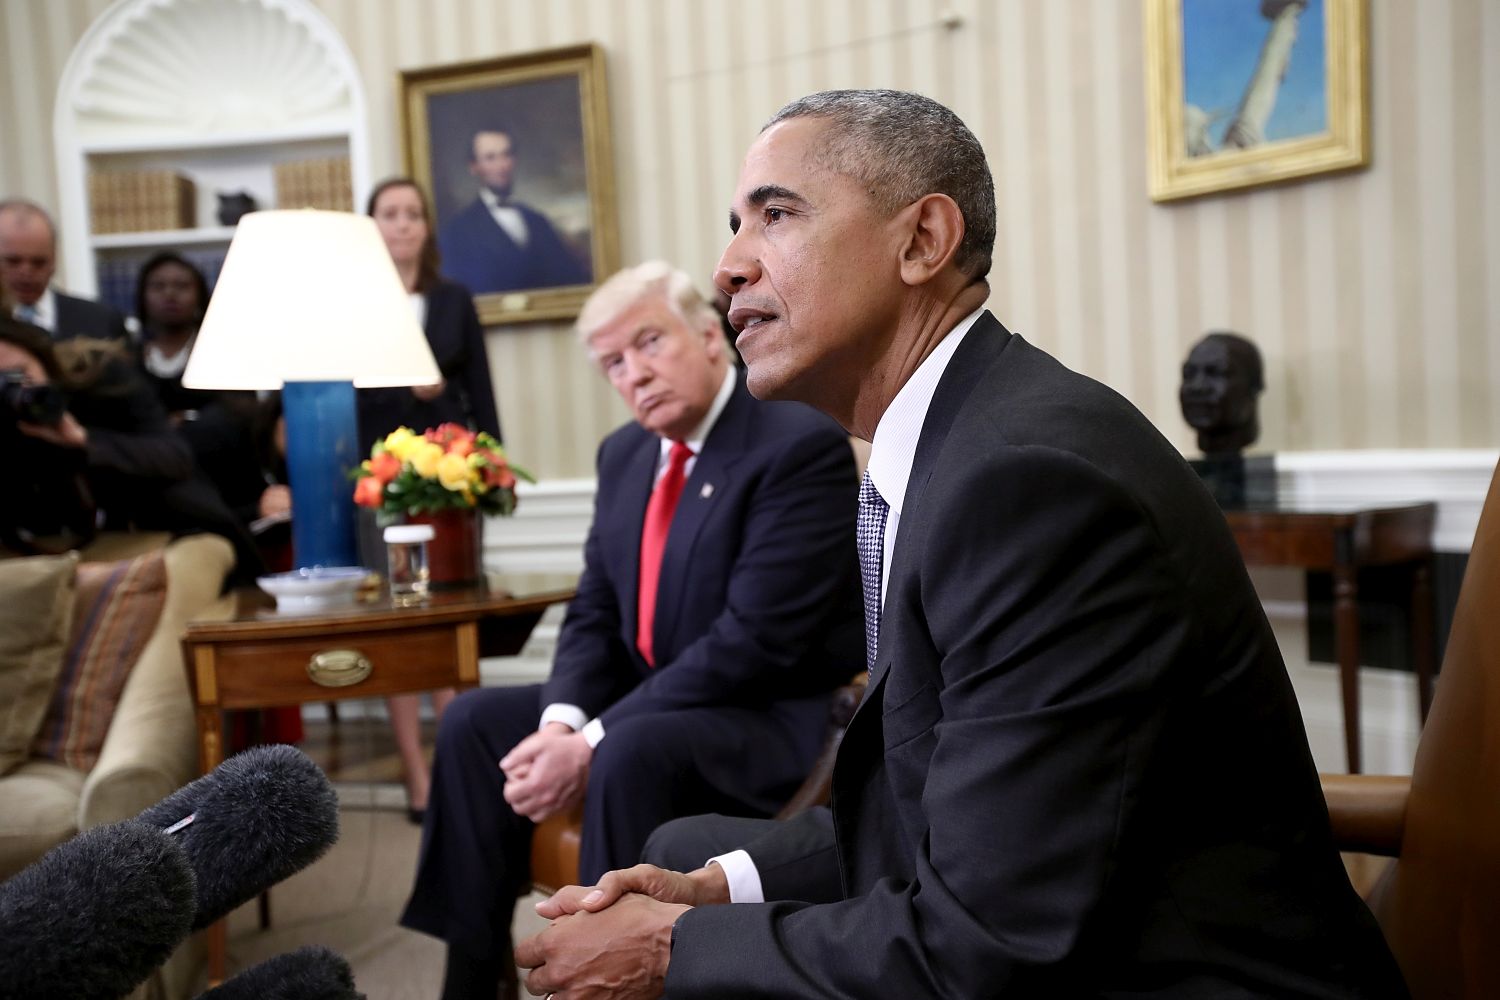 WASHINGTON, DC - NOVEMBER 10: President-elect Donald Trump (L) listens as U.S. President Barack Obama speaks during a meeting in the Oval Office November 10, 2016 in Washington, DC. Trump is scheduled to meet with members of the Republican leadership in Congress later today on Capitol Hill. (Photo by Win McNamee/Getty Images)